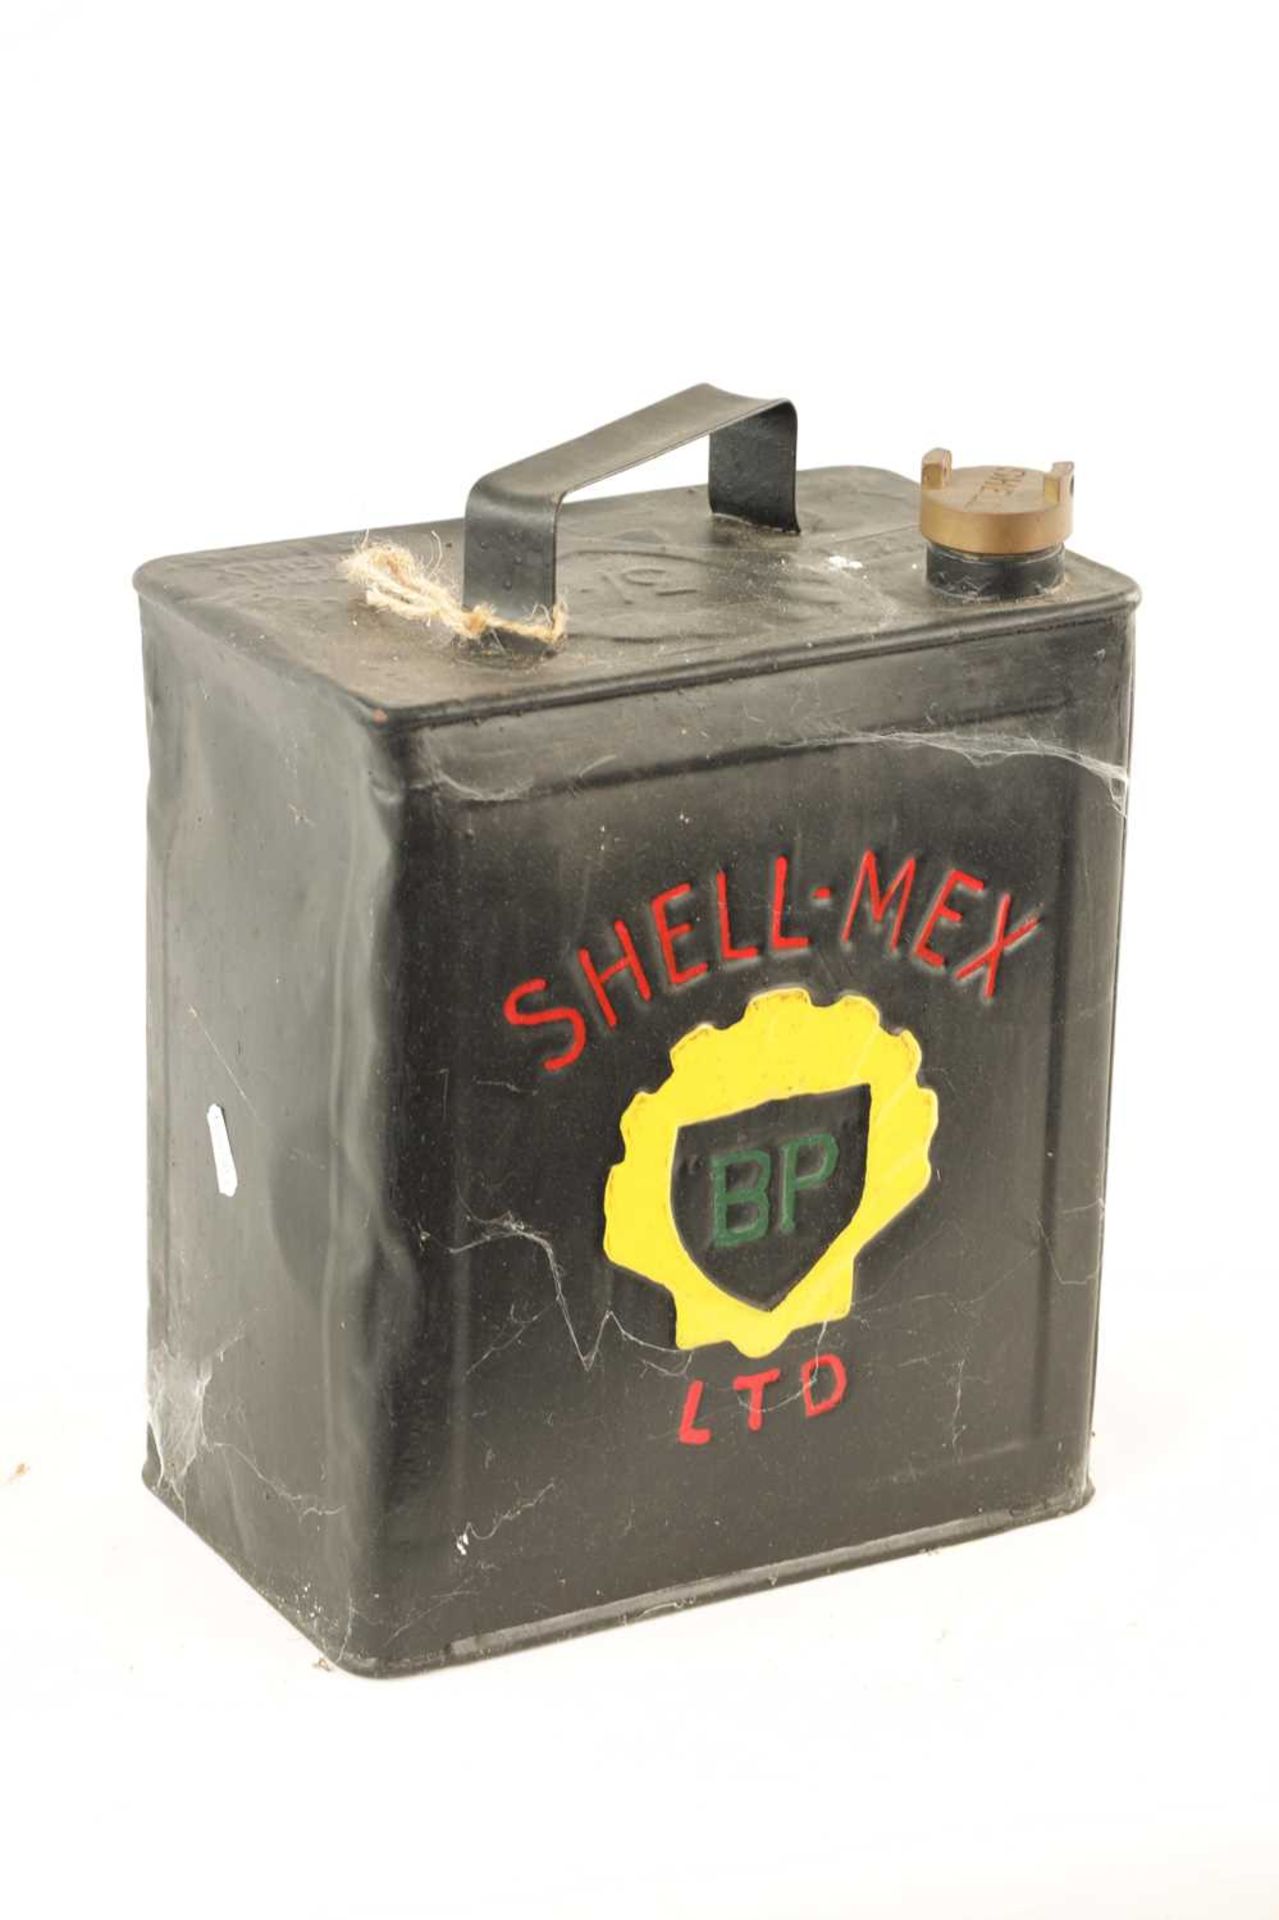 A VINTAGE 'SHELL BP' PETROL CAN - Image 4 of 4